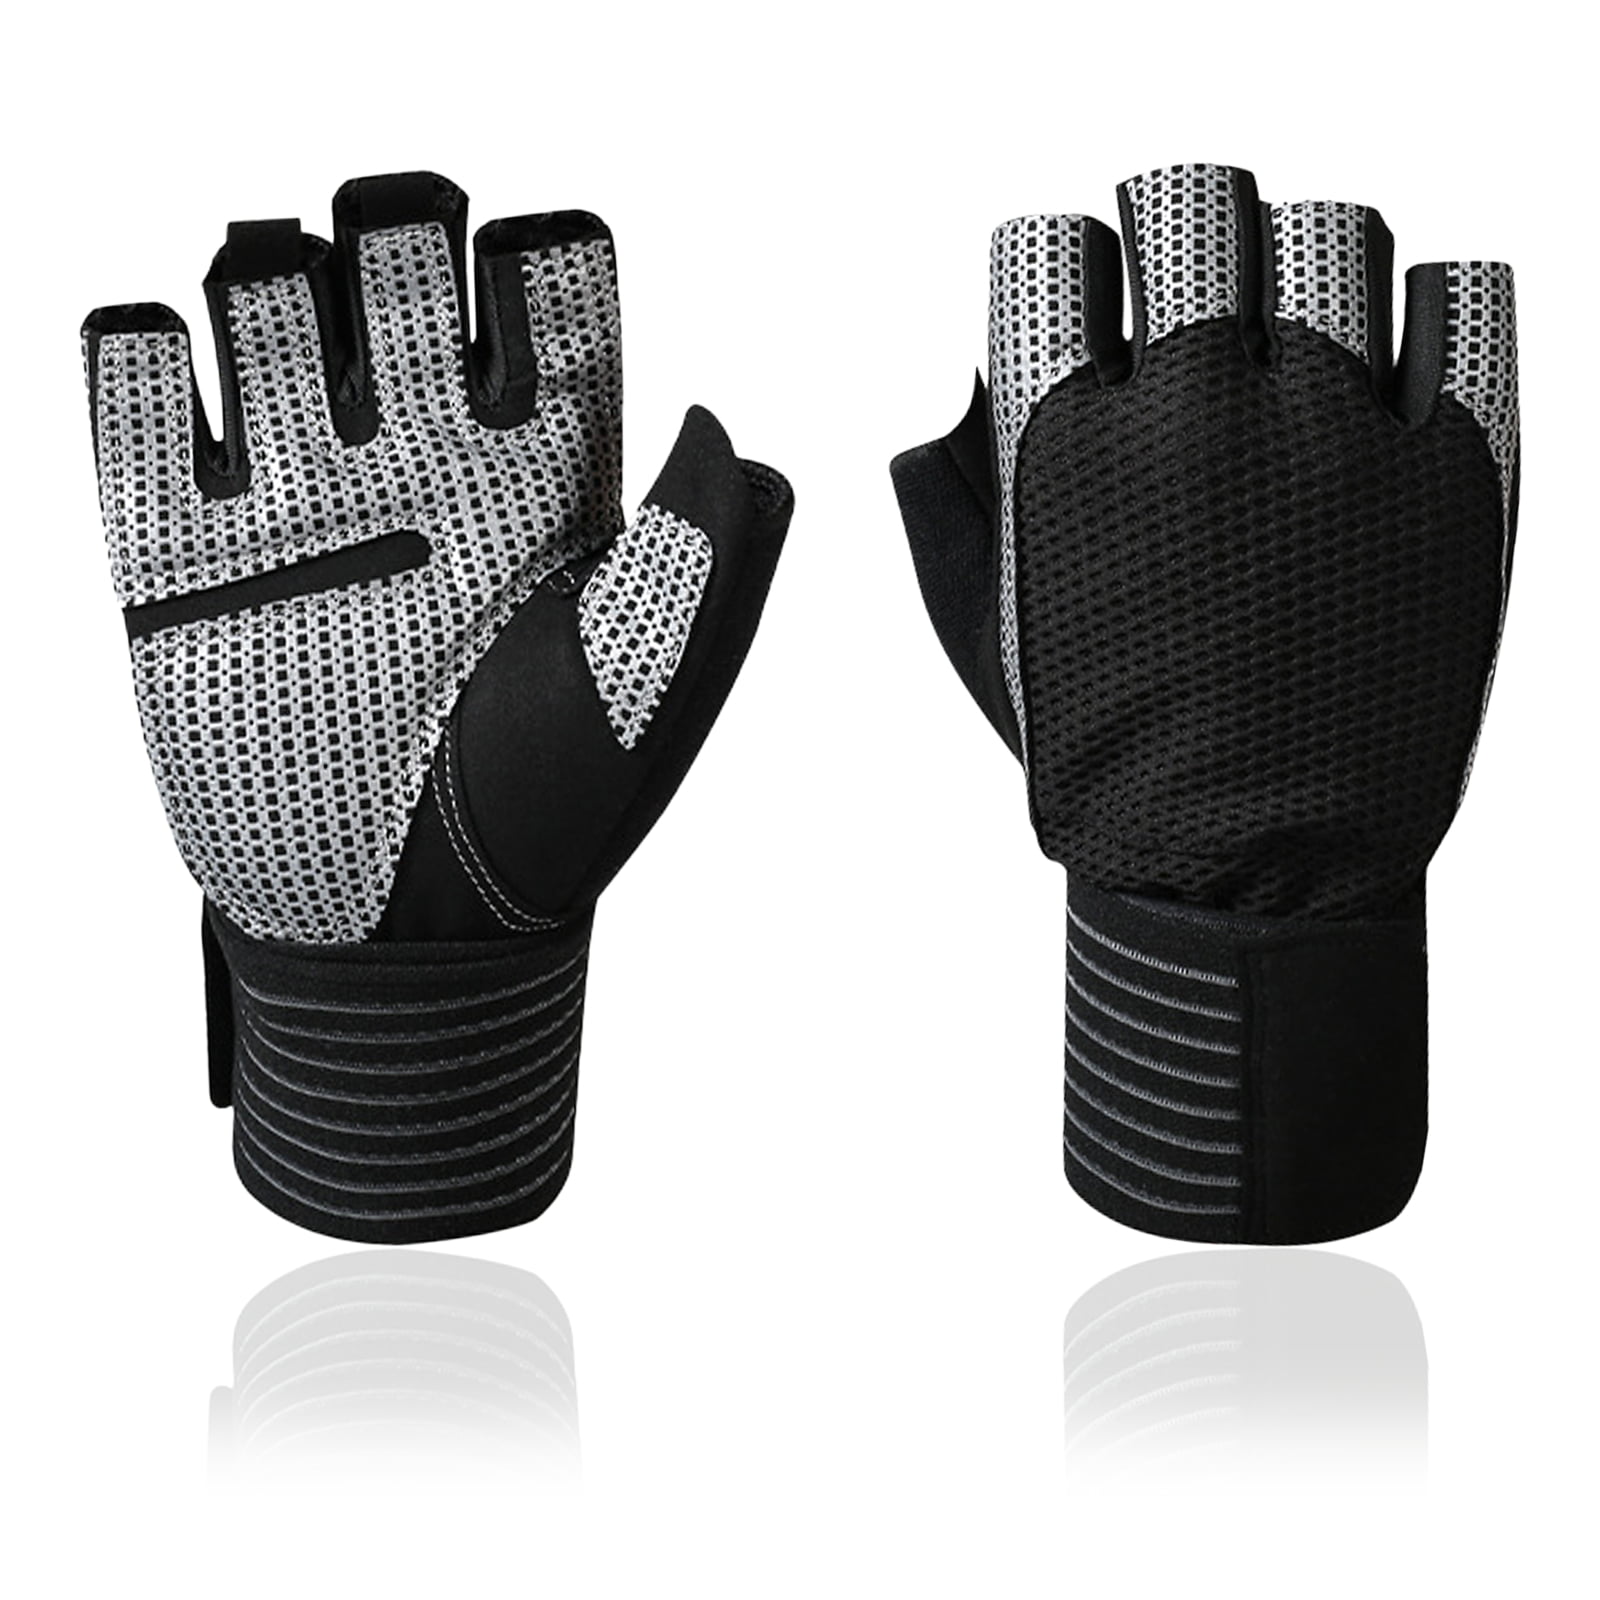 Details about   Motor Racing Silicone Half Fingers Gloves Bicycle Cycling Motorbike Riding Mitts 